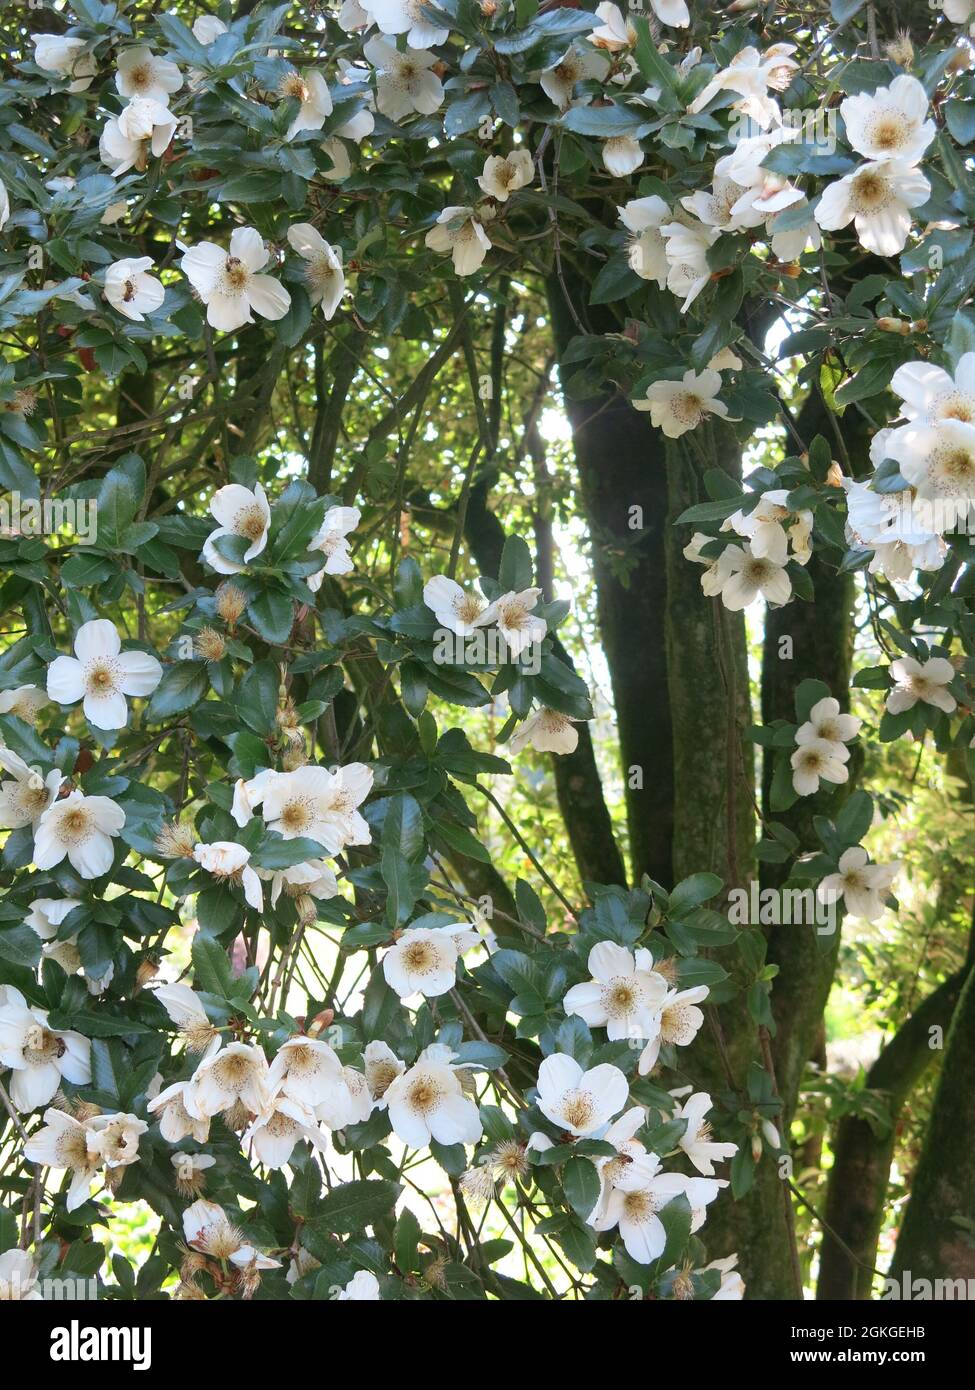 Close-up of the columnar tree Eucryphia 'Nymansay' in mid-summer in a Scottish garden, with its white, rose-like flowers in full bloom. Stock Photo